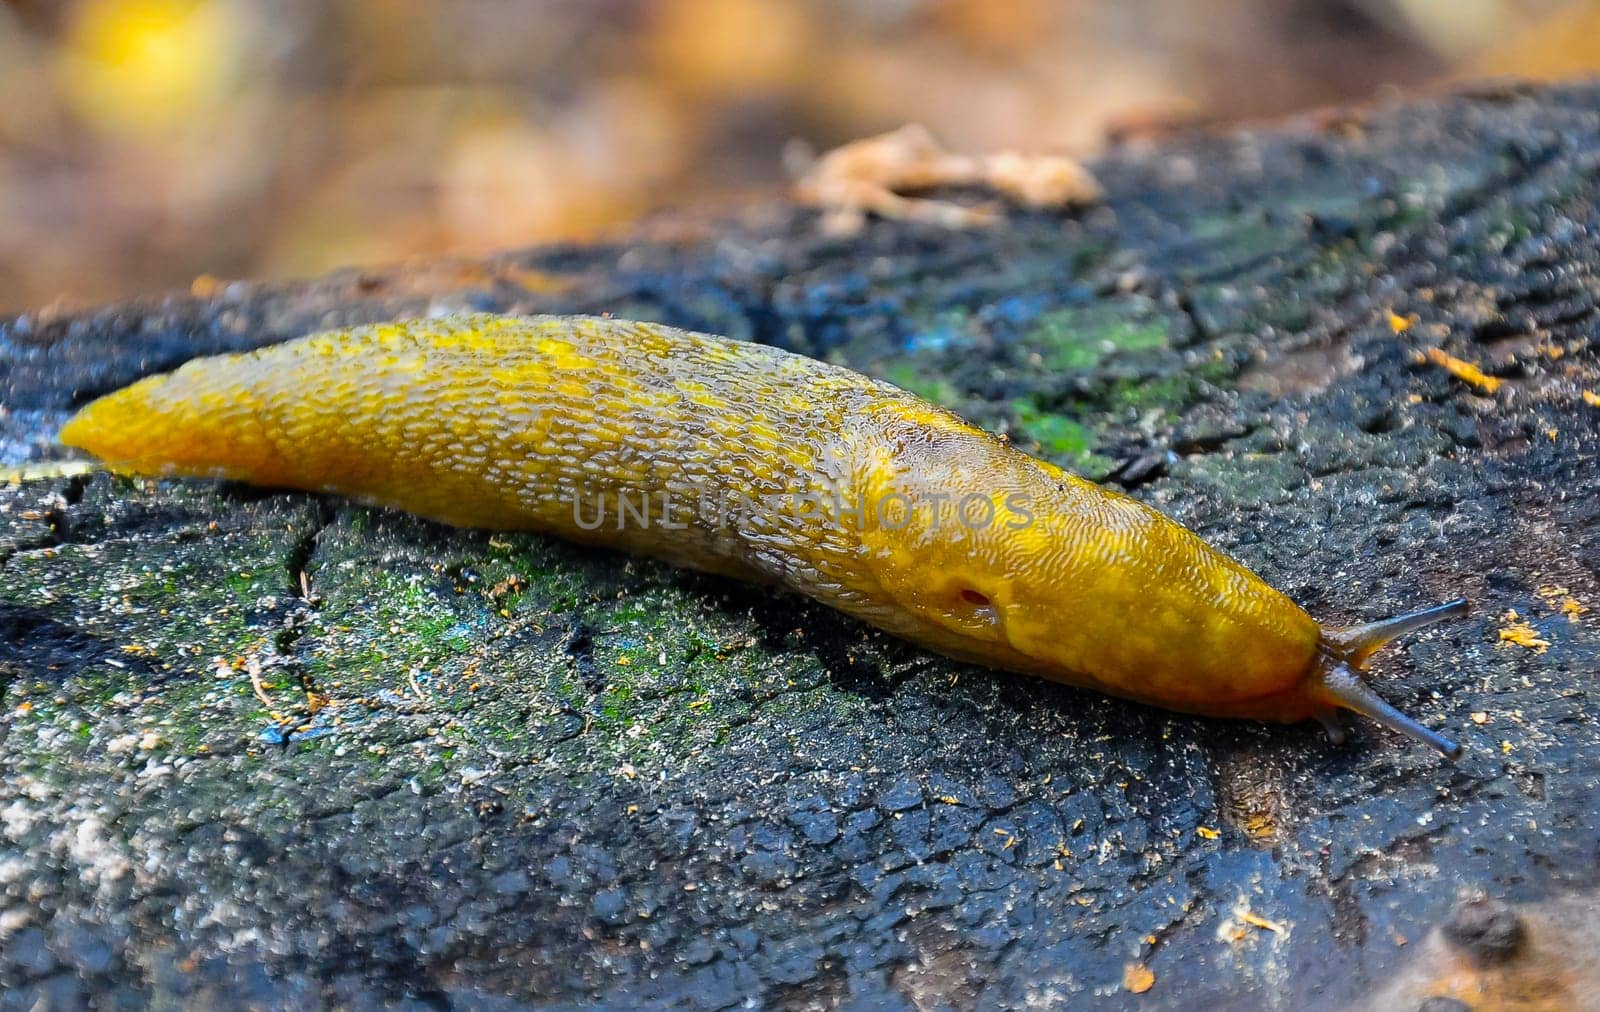 A yellow slippery Slug crawls along the ground. Agricultural pest by Hydrobiolog